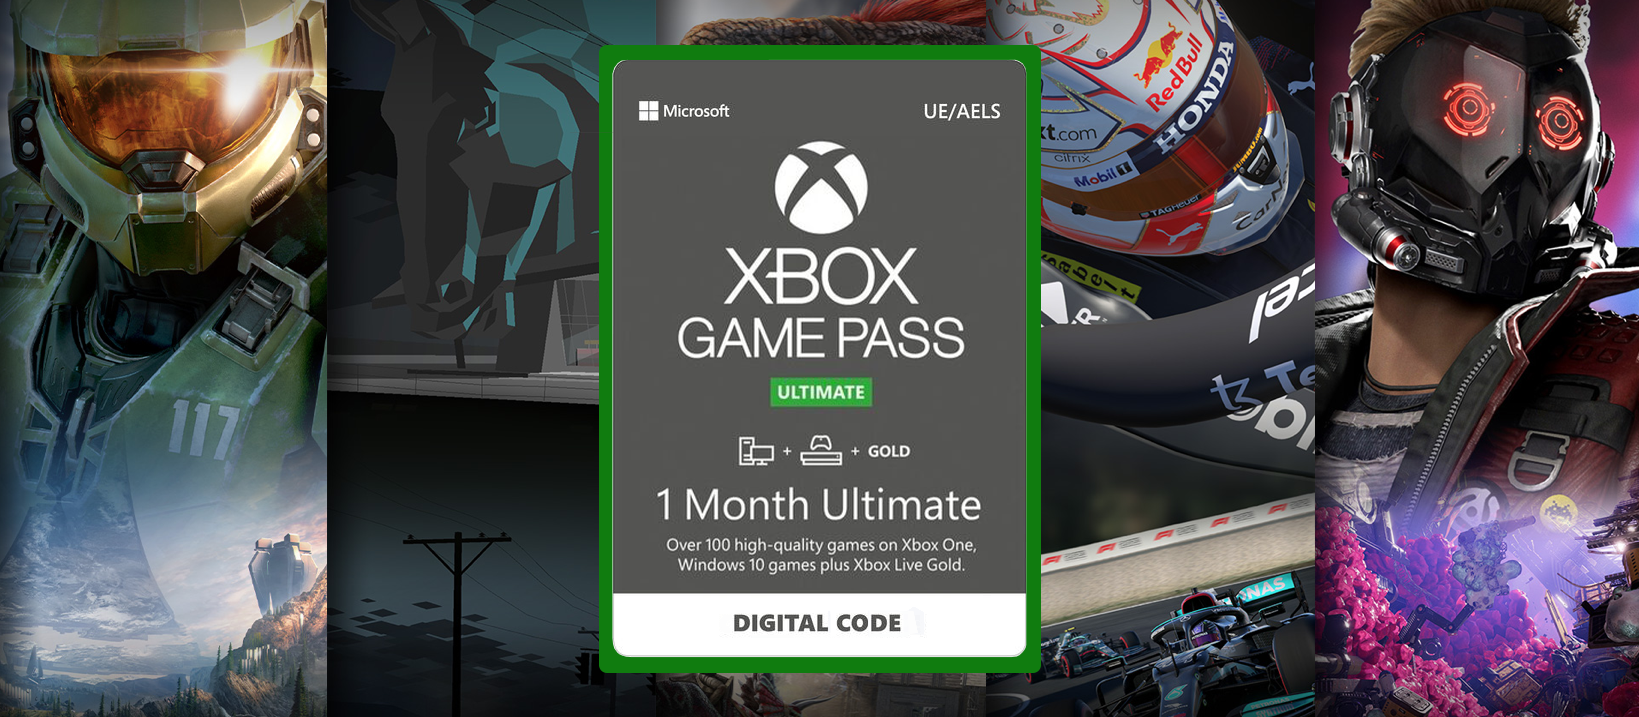 Xbox Game Pass For PC has launched with a £1 trial month